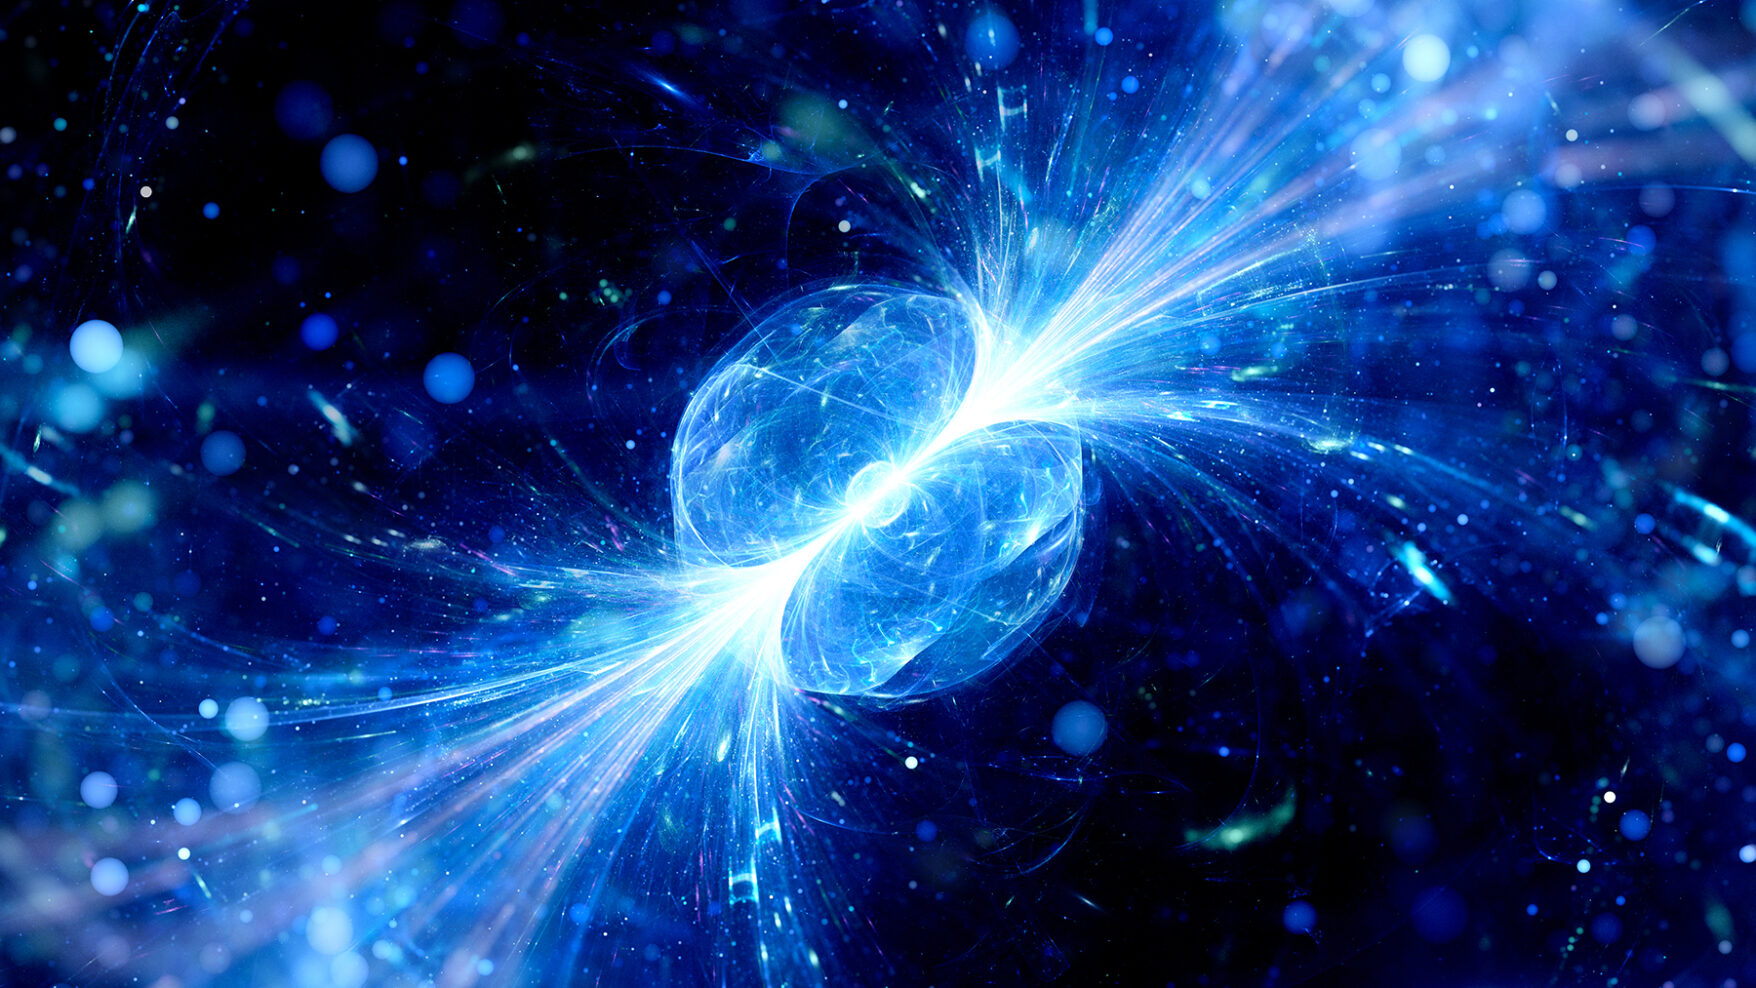 An artist's rendering of what a gamma ray burst may look like. There is a sphere of light with intense blue light focused on the diameter line of the sphere.